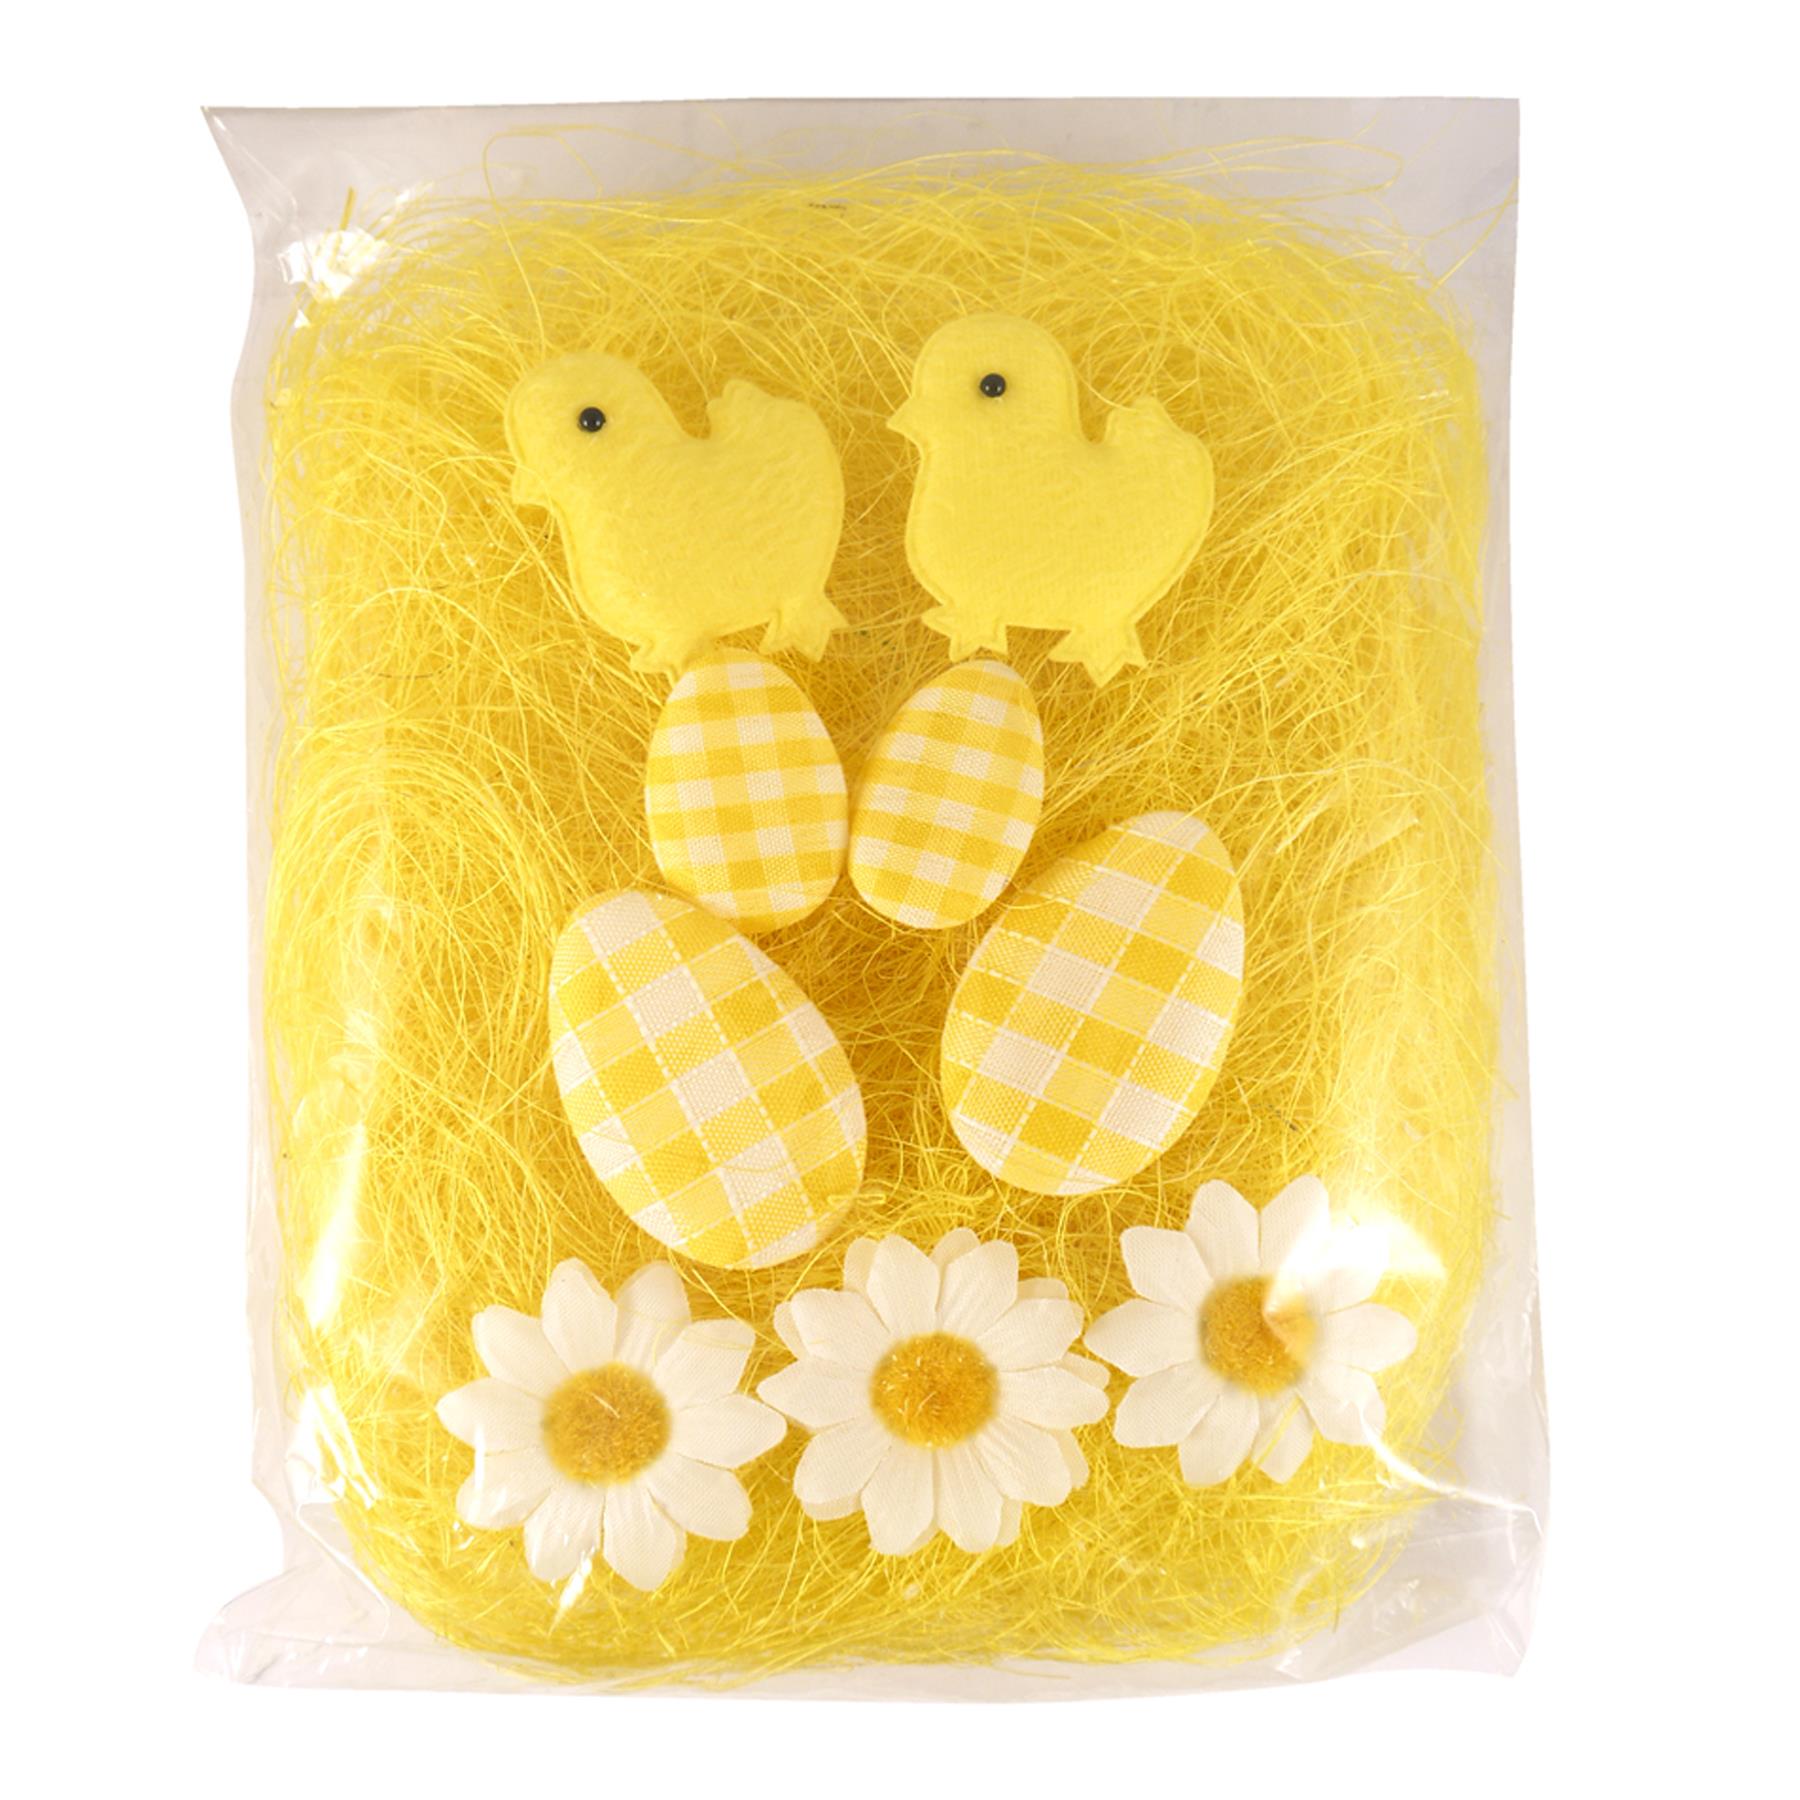 Easter Decorations, Bonnet Arts and Crafts, Egg Hunt - Grass Chicks Eggs Yellow